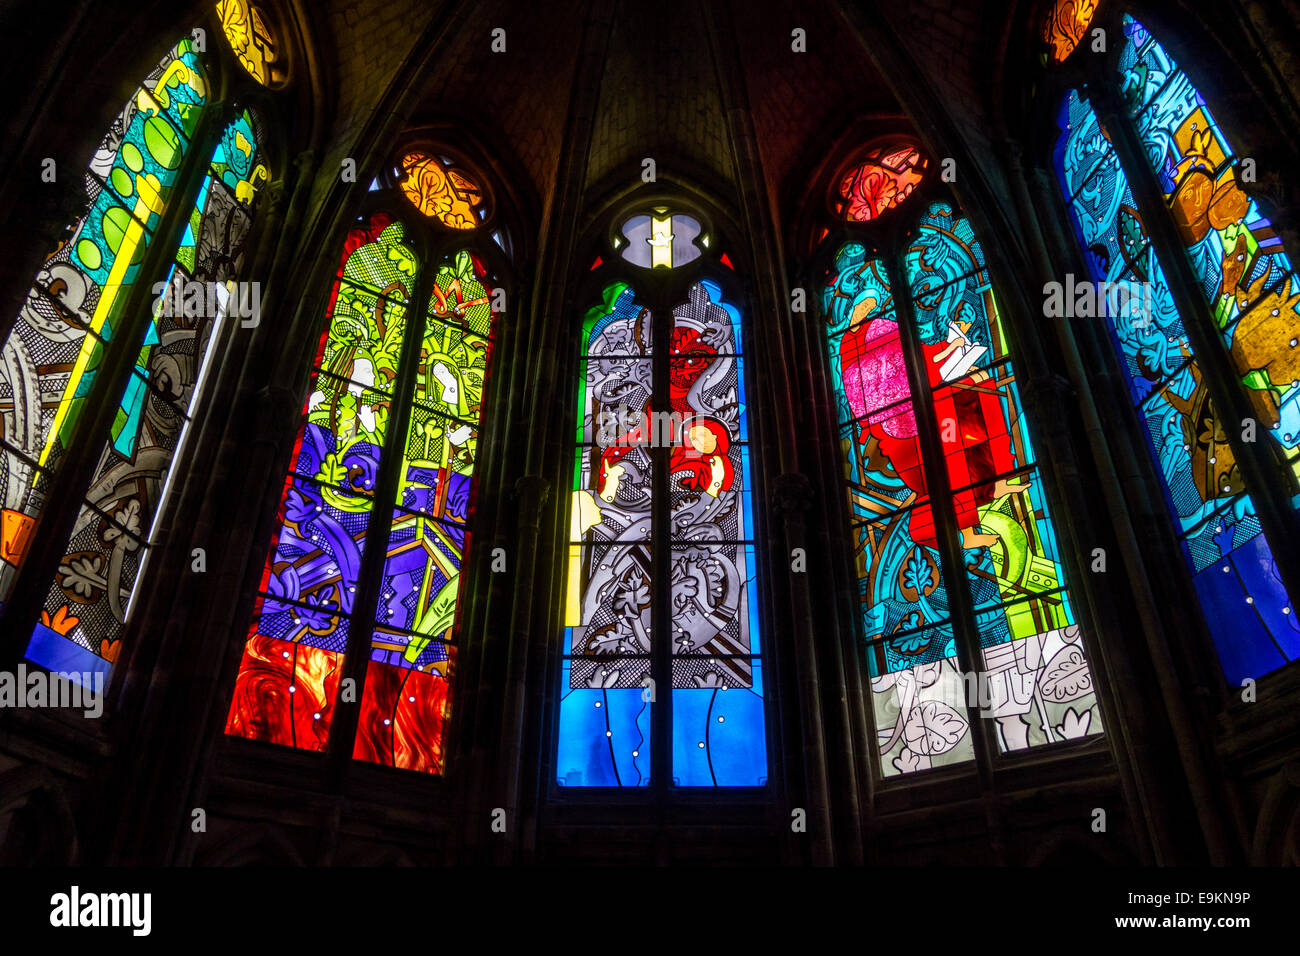 Modern stained glass windows in the Nevers Cathedral / Cathédrale Saint-Cyr-et-Sainte-Julitte de Nevers, Burgundy, France Stock Photo